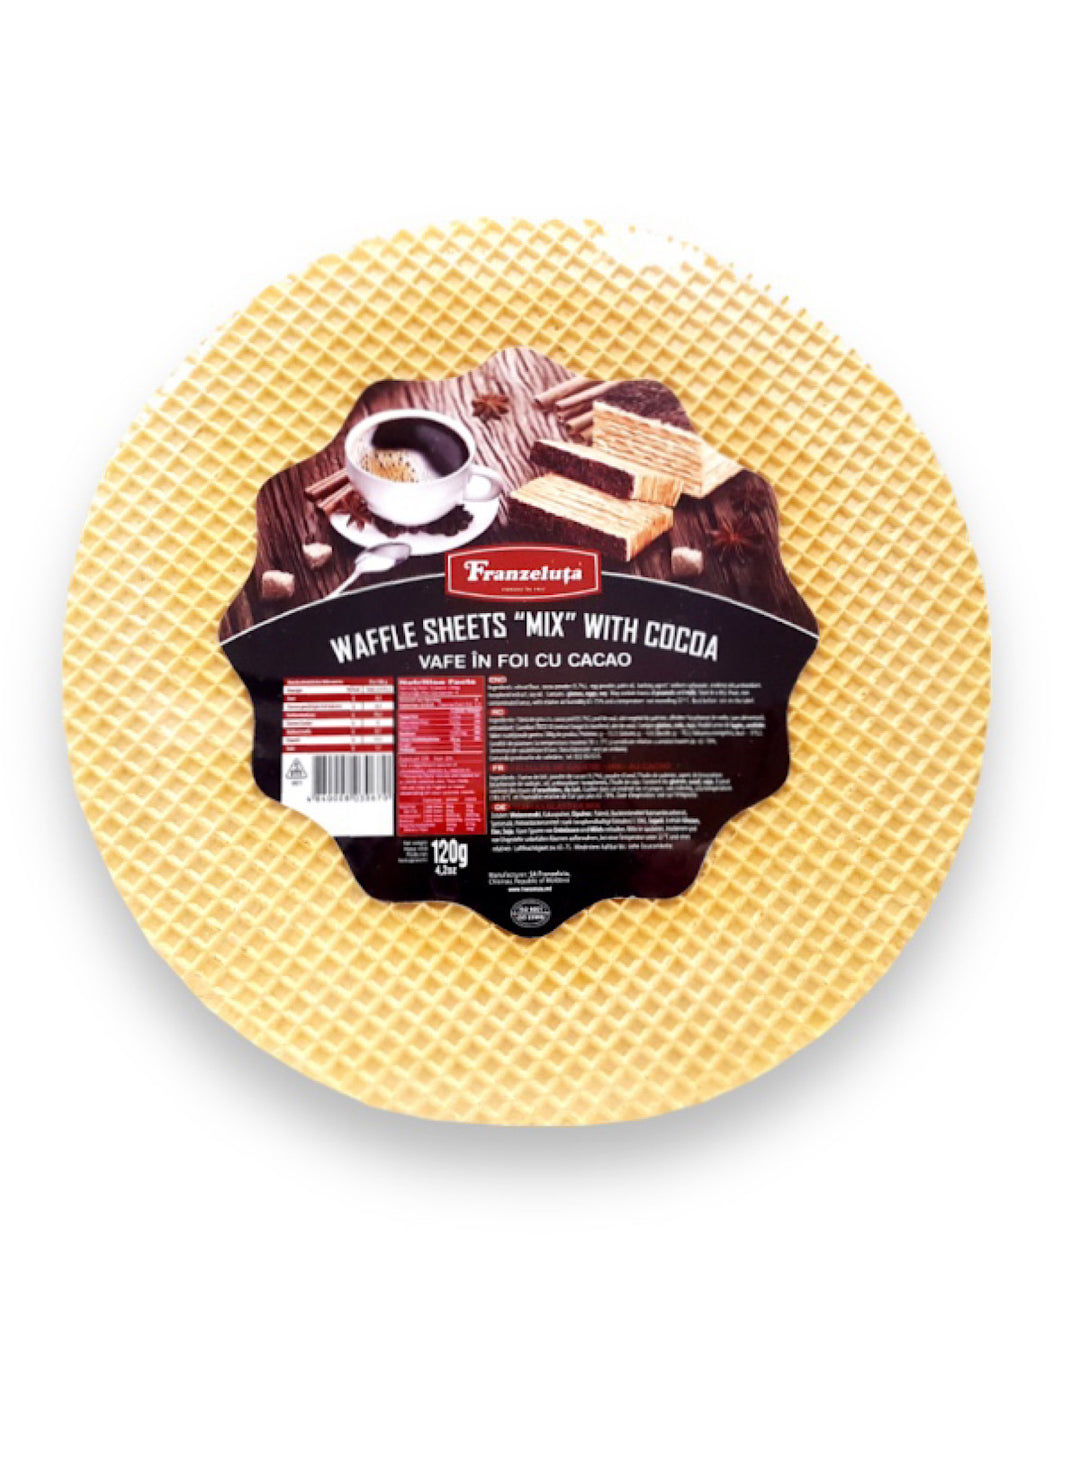 Wafer Sheets Duo with Cacao - Franzeluta - 120g